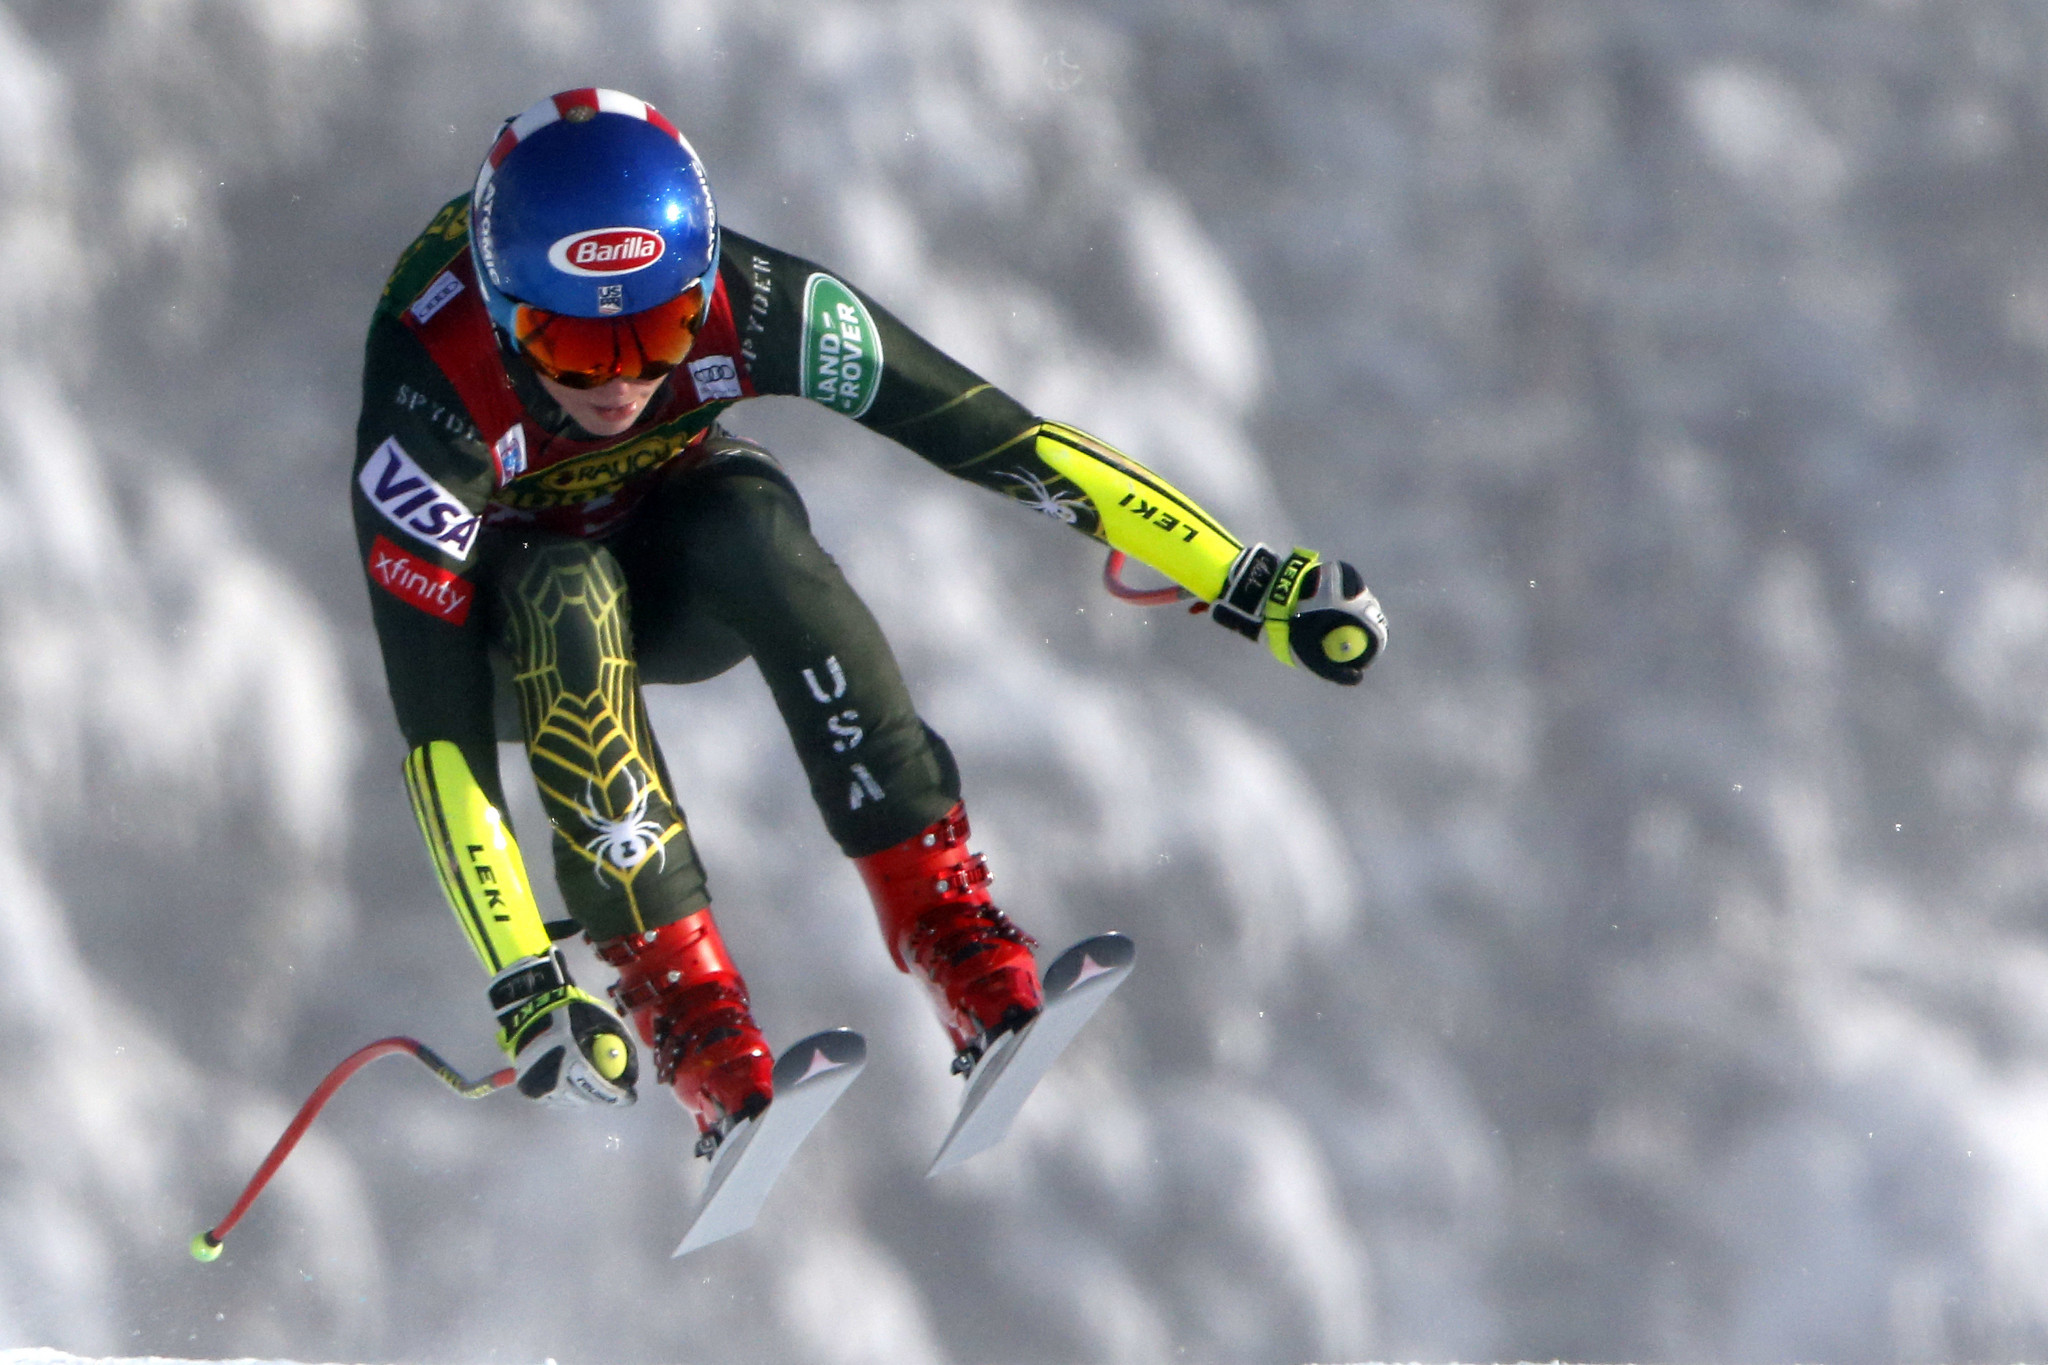 Mikaela Shiffrin is looking to make more history at the FIS Alpine Skiing World Cup in St Moritz ©Getty Images